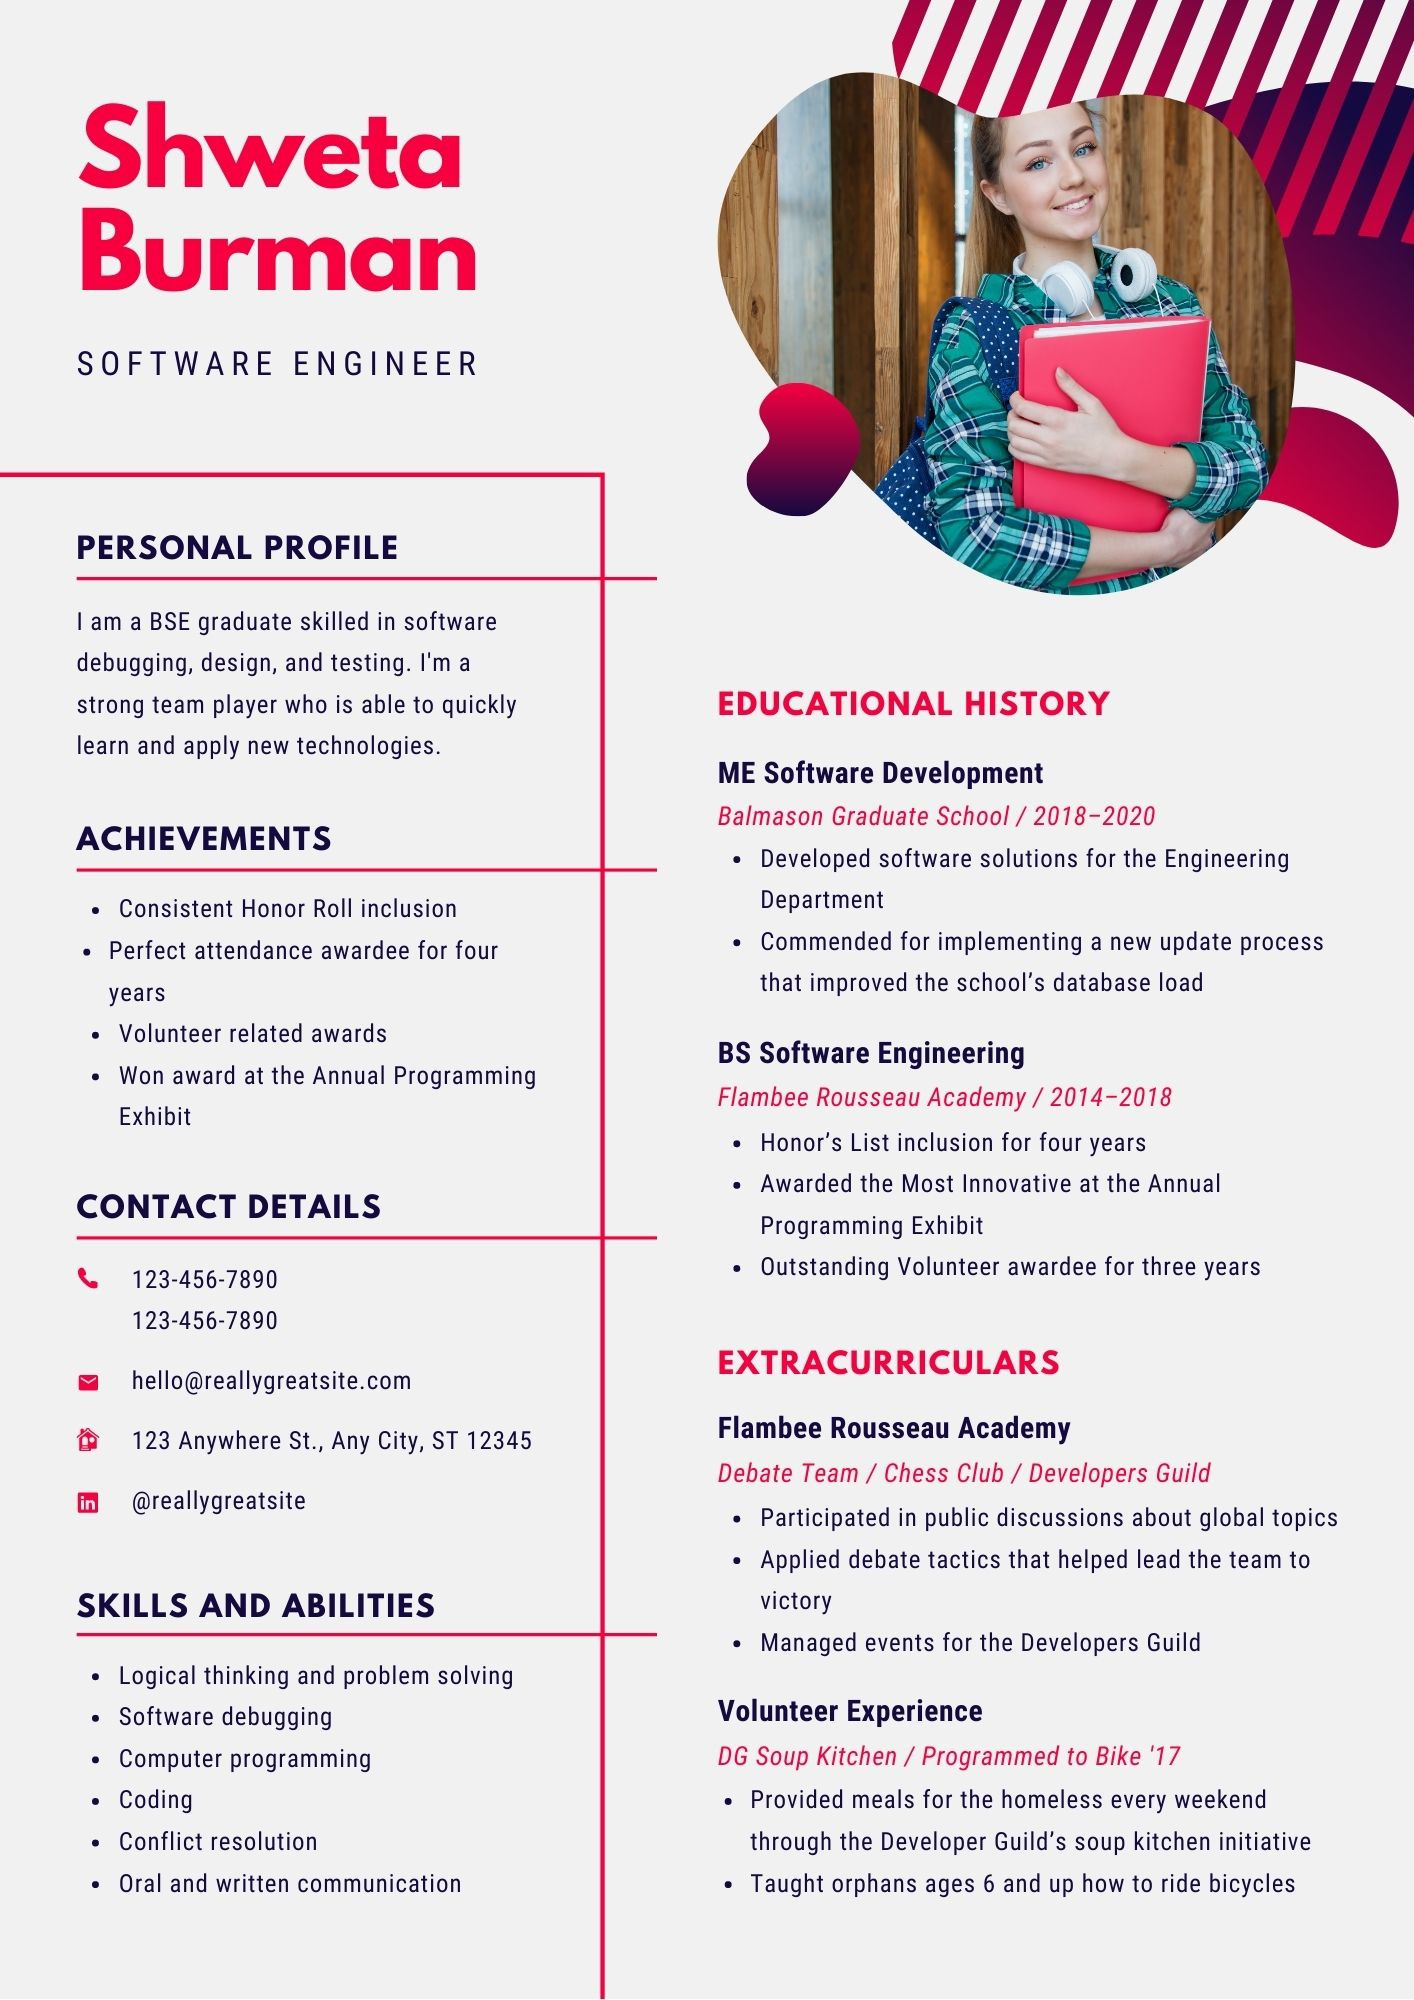 Resume Templates for Fresher software Engineer software Developer Resume Samples Fresher & Experienced Word, Pdf